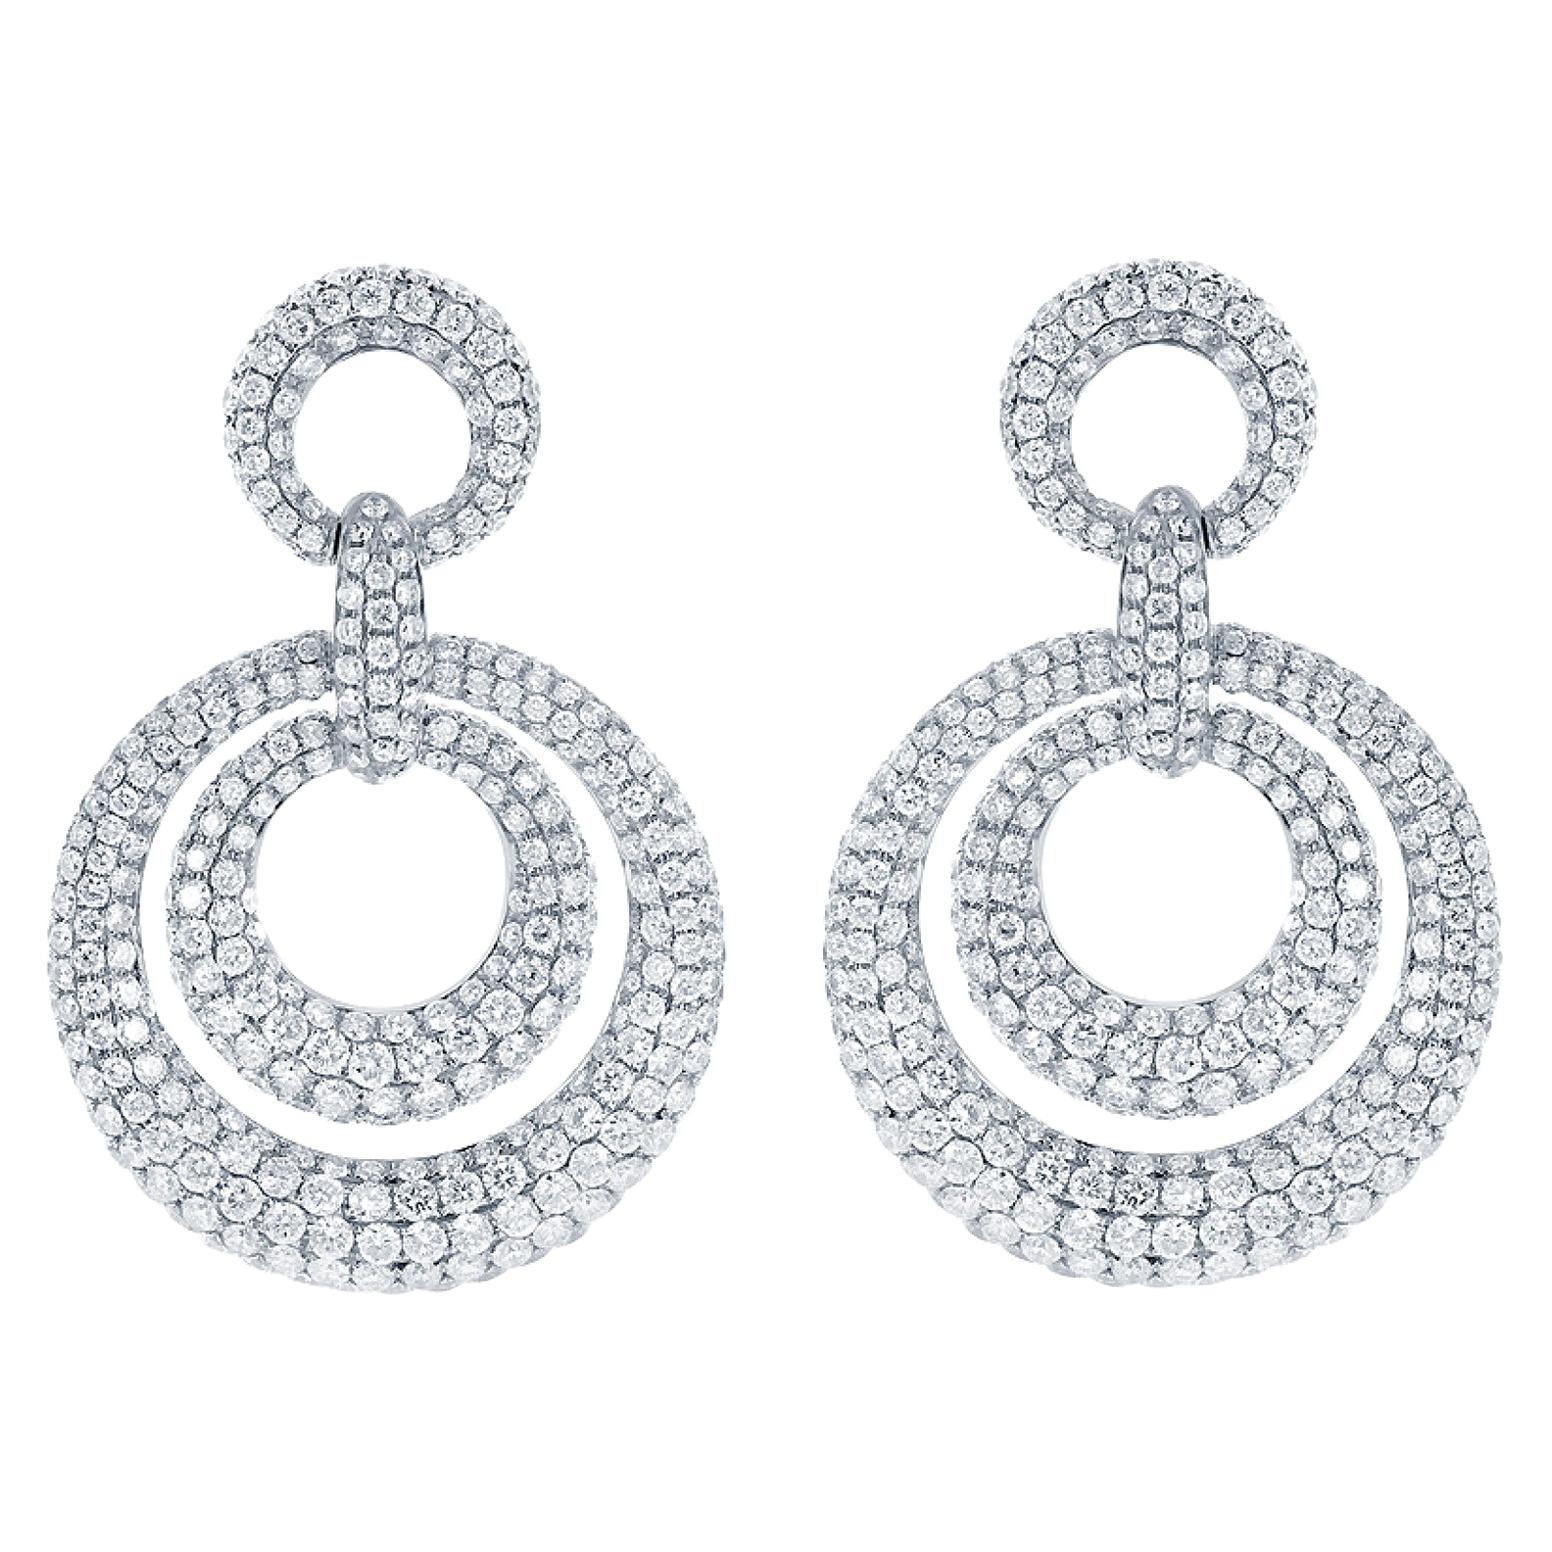 Pave Concentric Circles Drop Diamond Earrings, 8.73ct of Diamonds in 18kt Gold For Sale